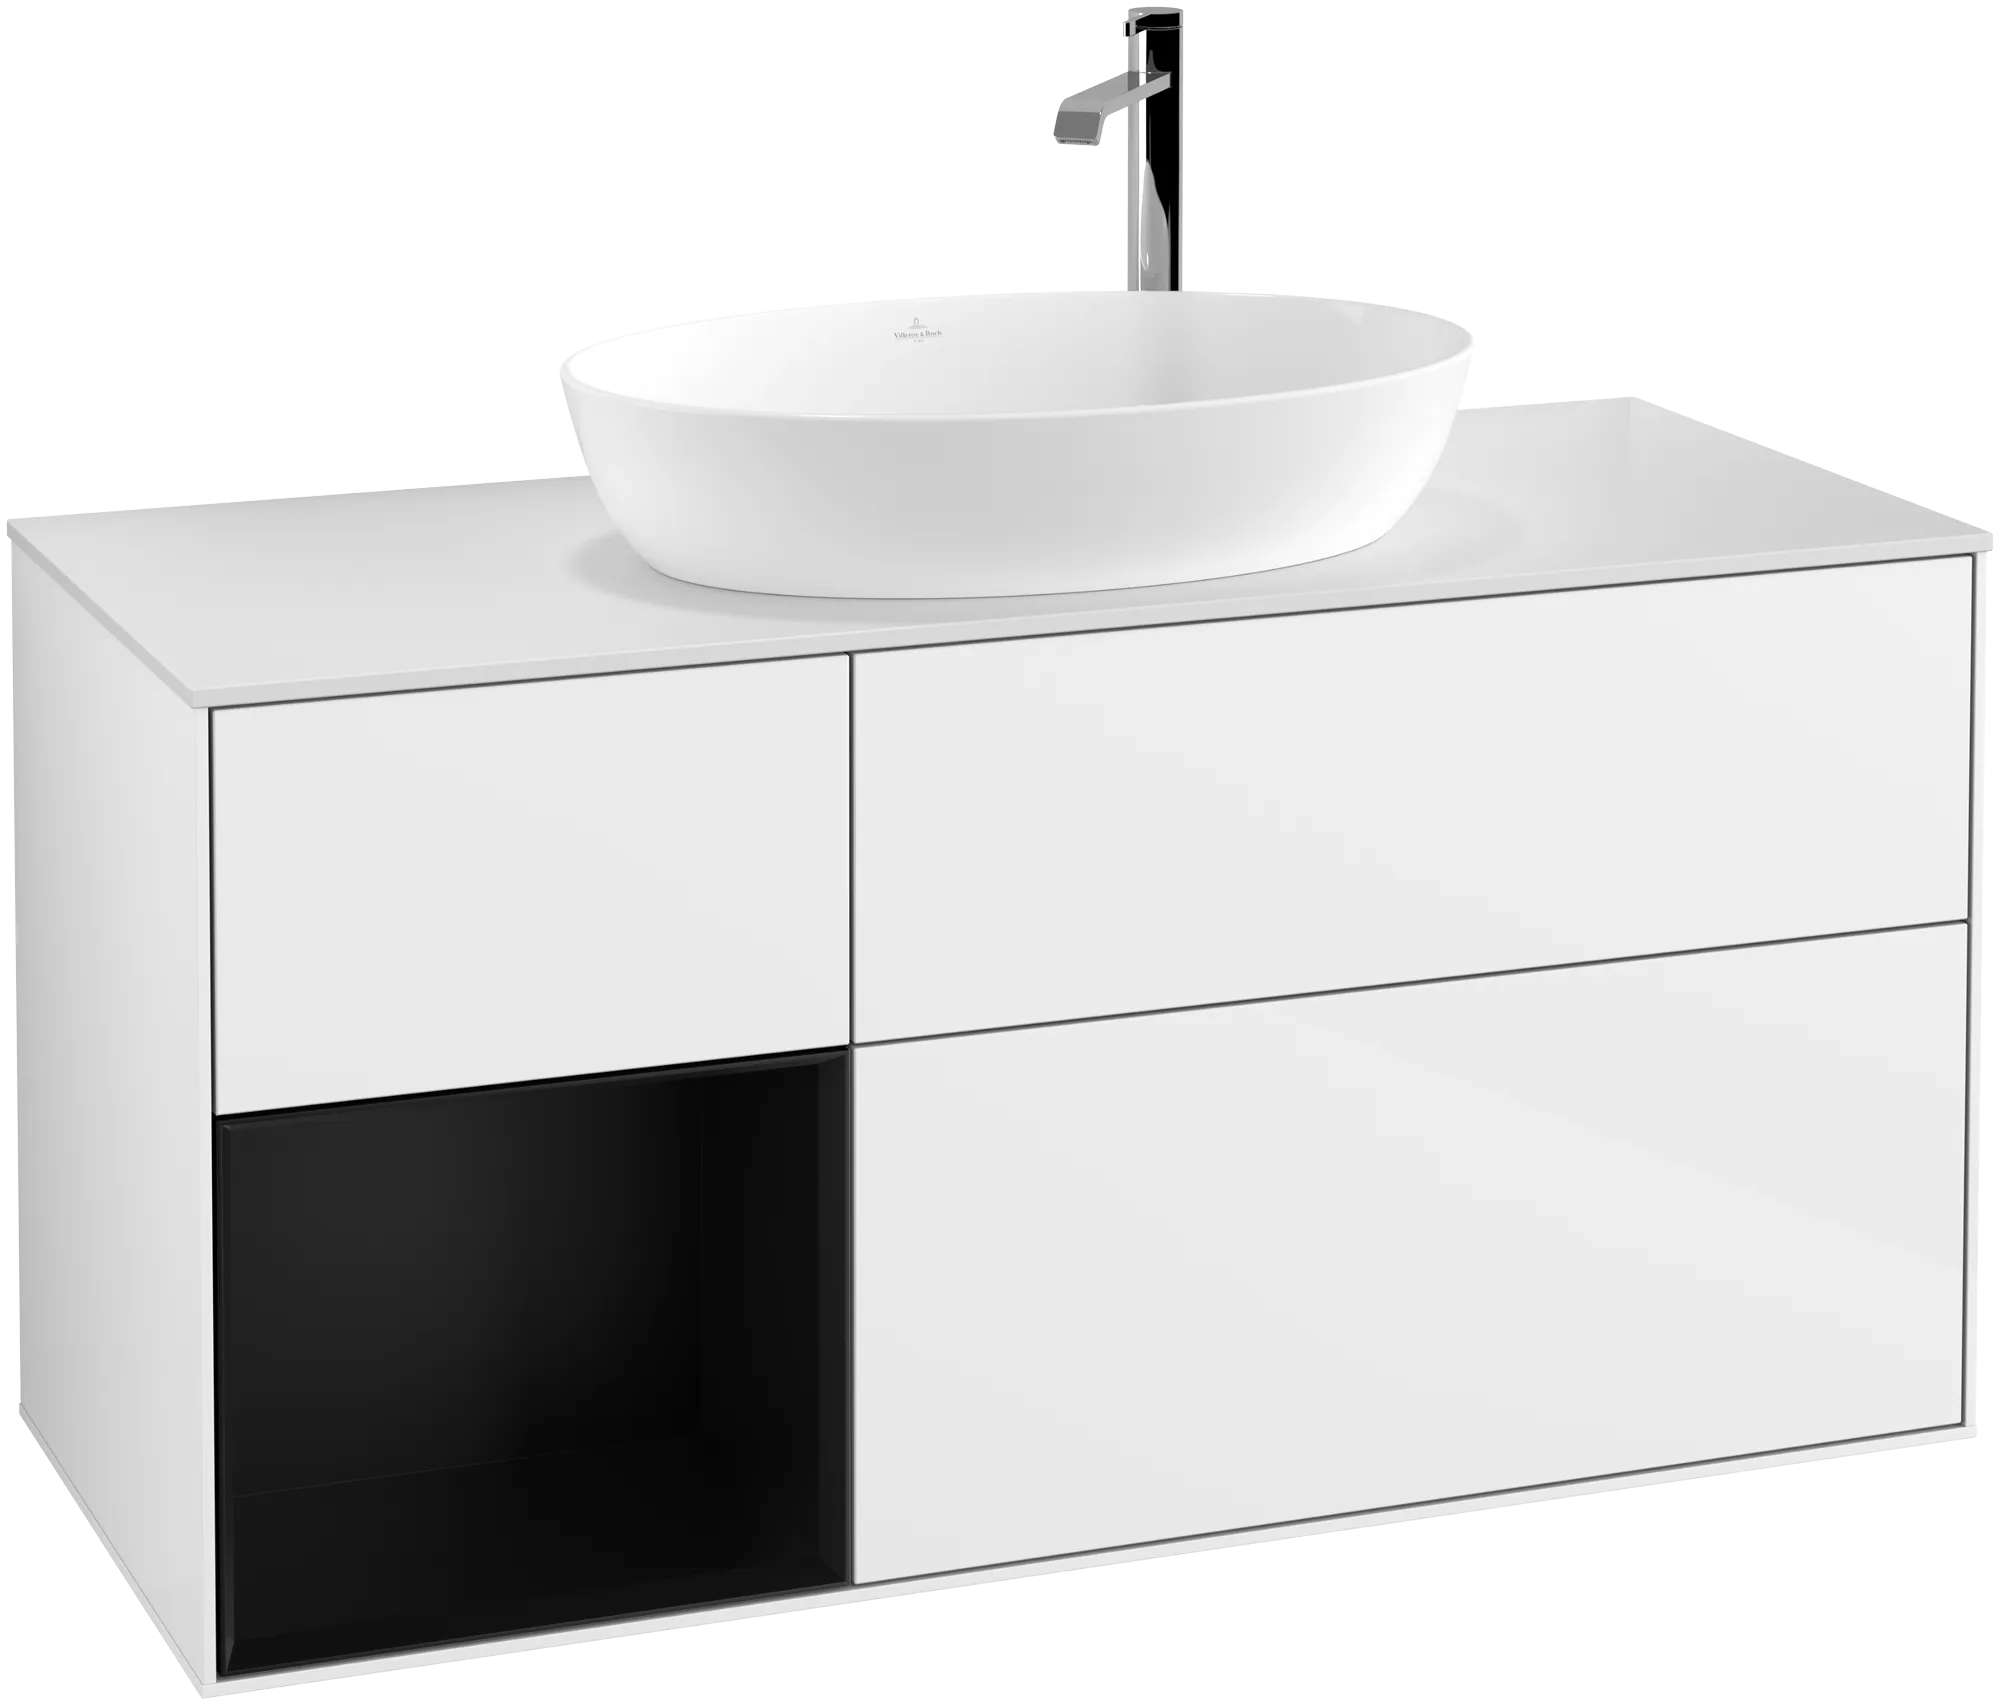 Obrázek VILLEROY BOCH Finion Vanity unit, with lighting, 3 pull-out compartments, 1200 x 603 x 501 mm, Glossy White Lacquer / Black Matt Lacquer / Glass White Matt #G941PDGF